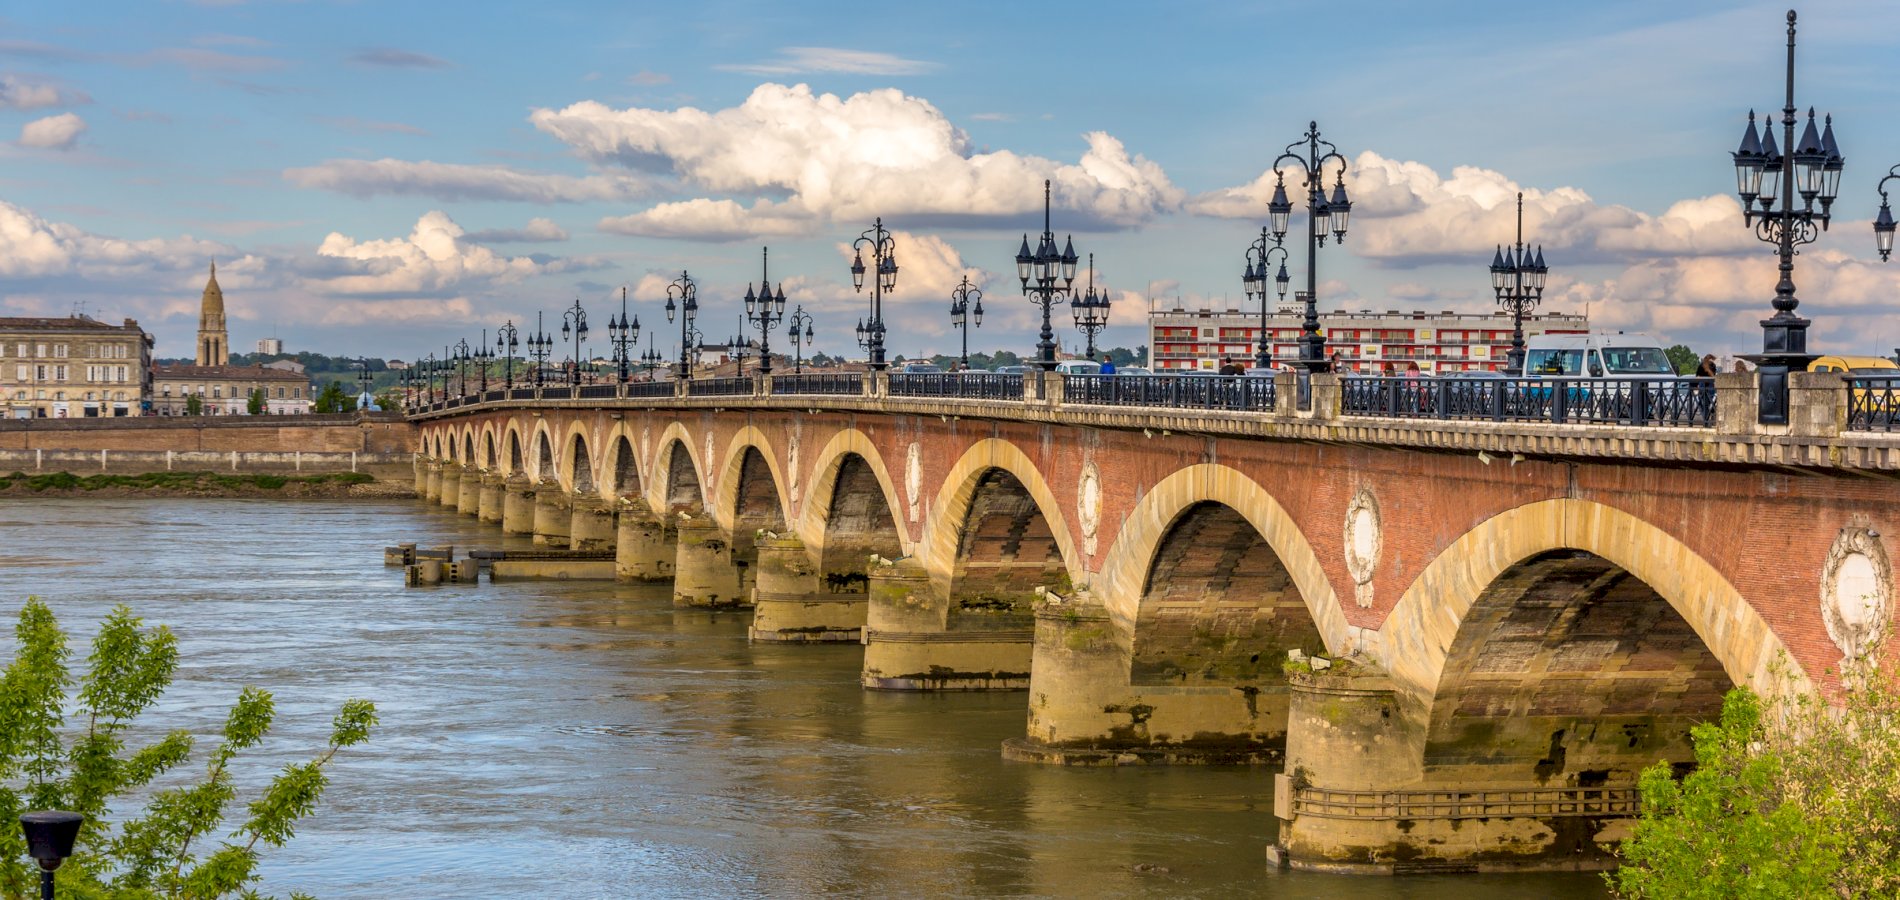 Ophorus Tours - 4 Days Bordeaux Wine Tour Shared Travel Package - 3* Hotel Option 